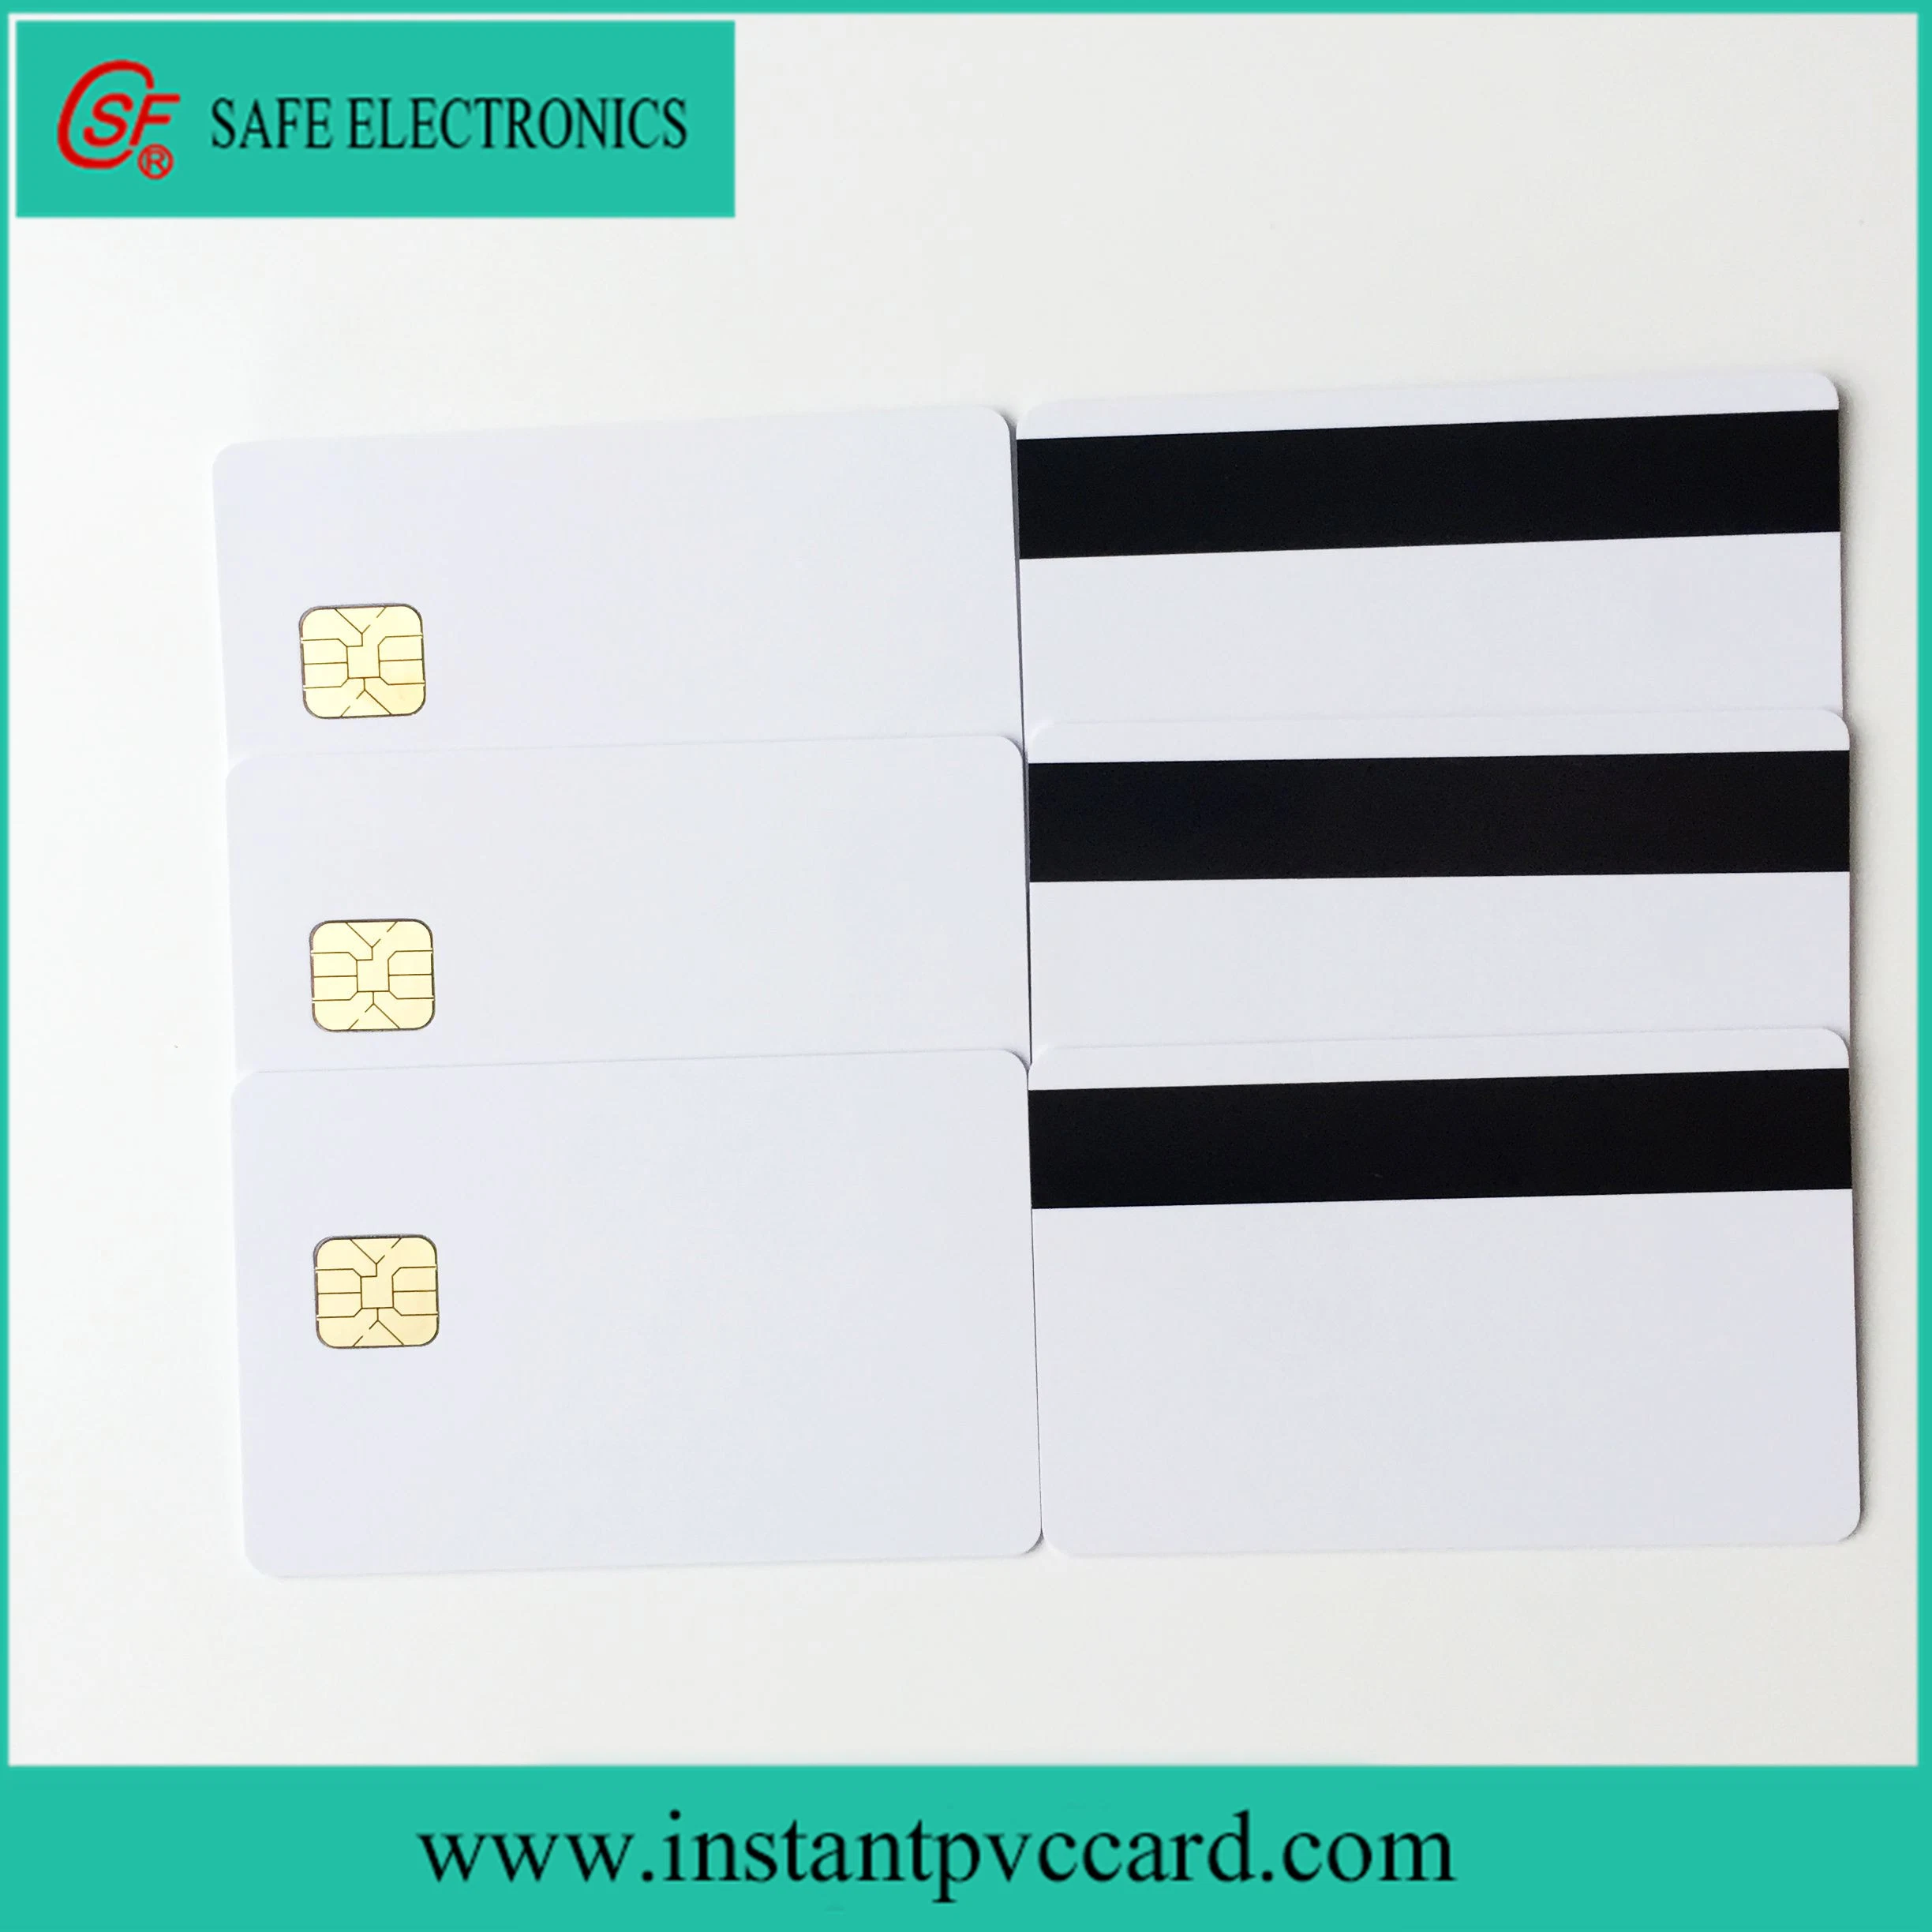 Glossy Magnetic Stripe Card with Sle4428 Chip